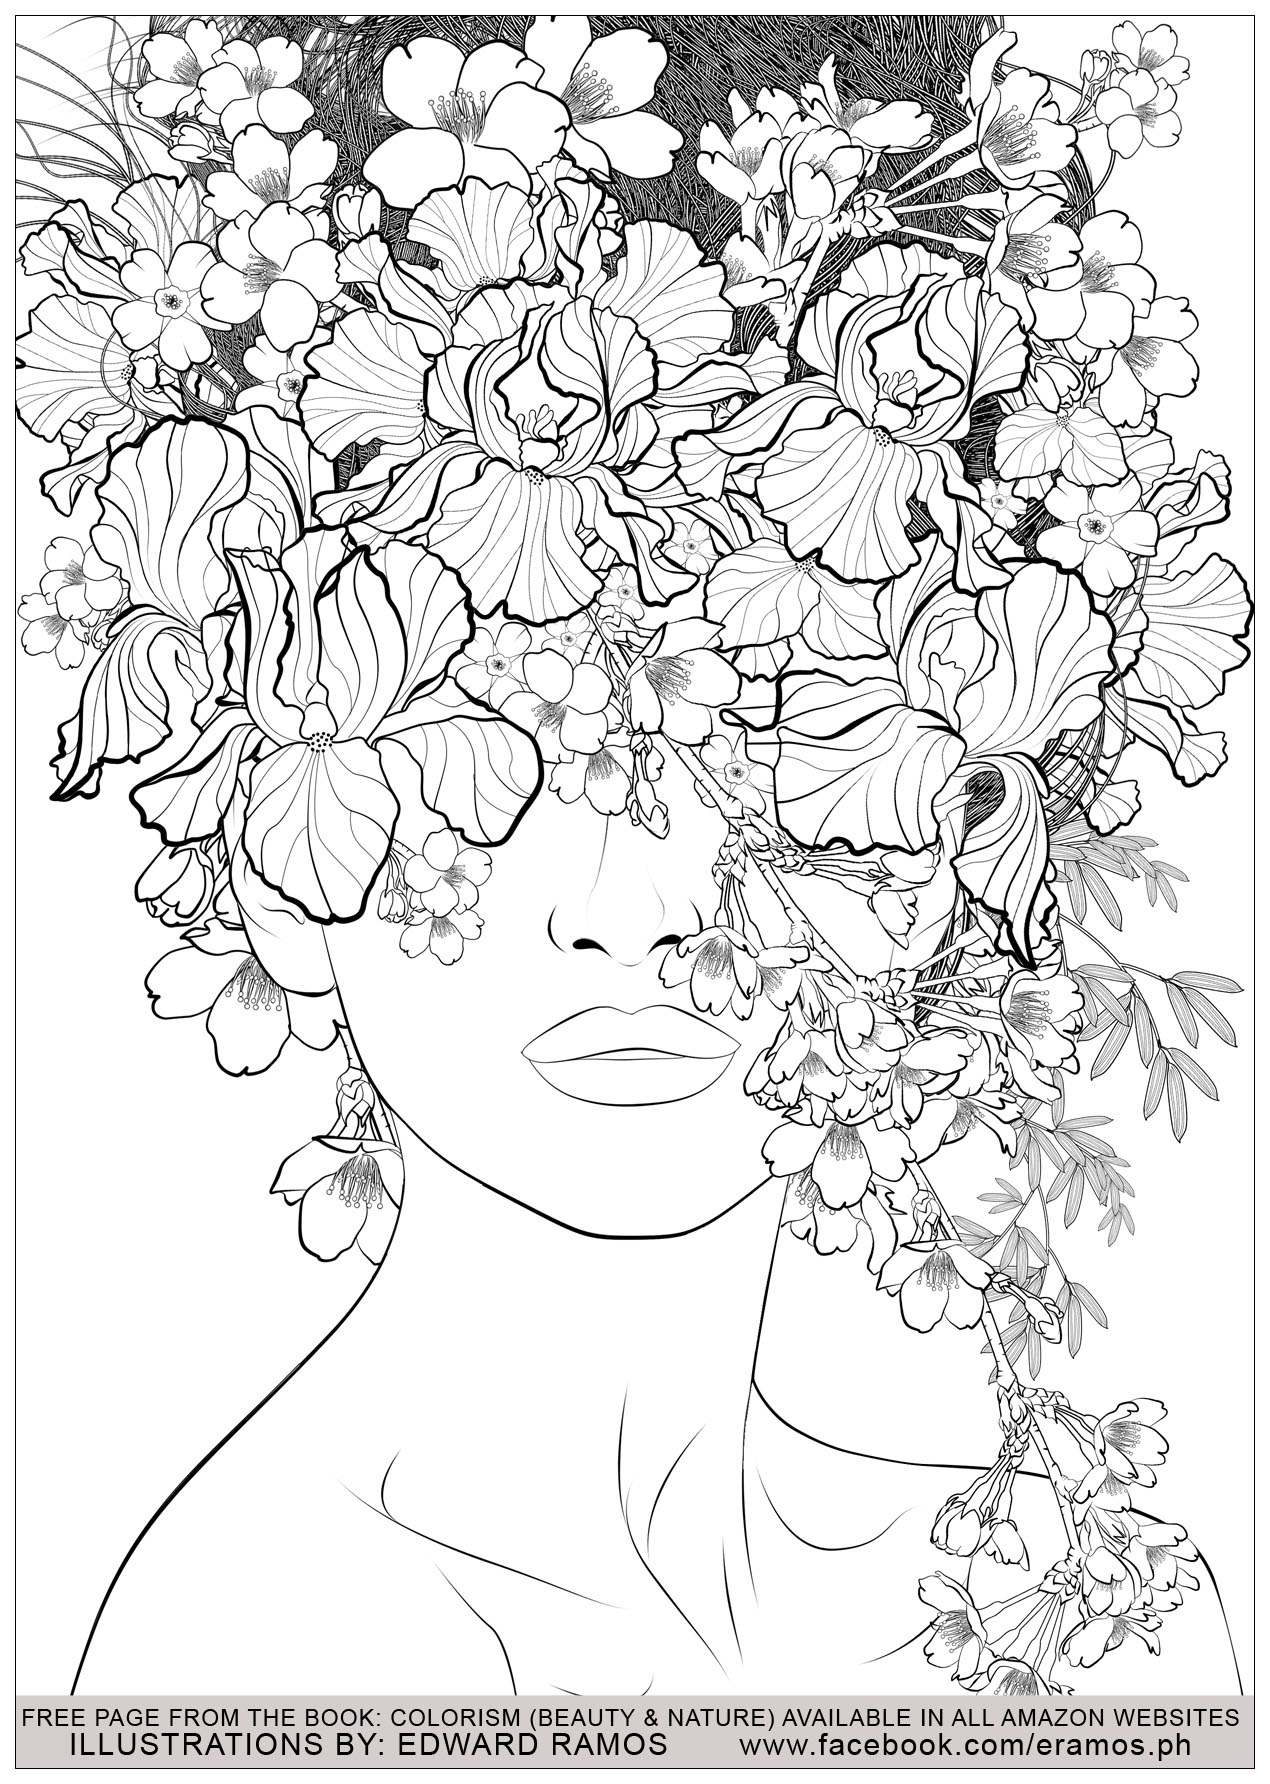 Illustration from the book Colorism - Beauty & Nature by Edward Ramos - 7